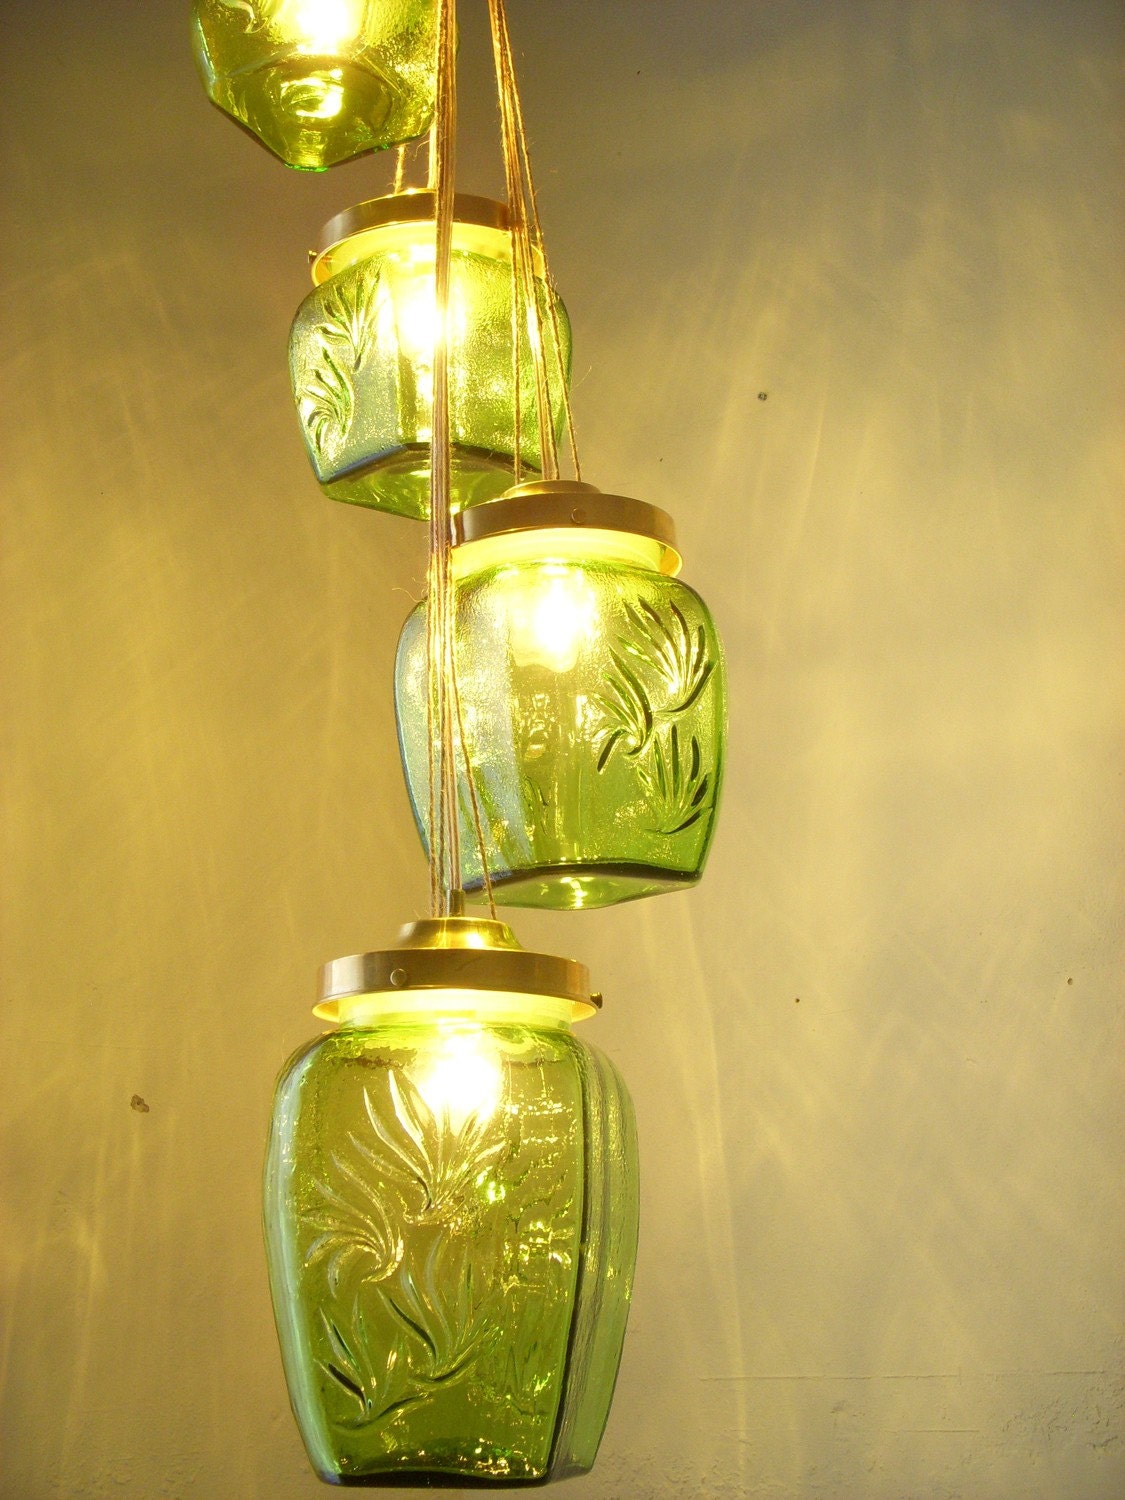 Spring Mornings Moss Green Glassware Natures Woodlands Splendor Swag Summer Nights Chandelier Hanging Pendant Lighting Fixture Lights - UpCycled ReCycled Swag Light - Wedding - Party - Holiday